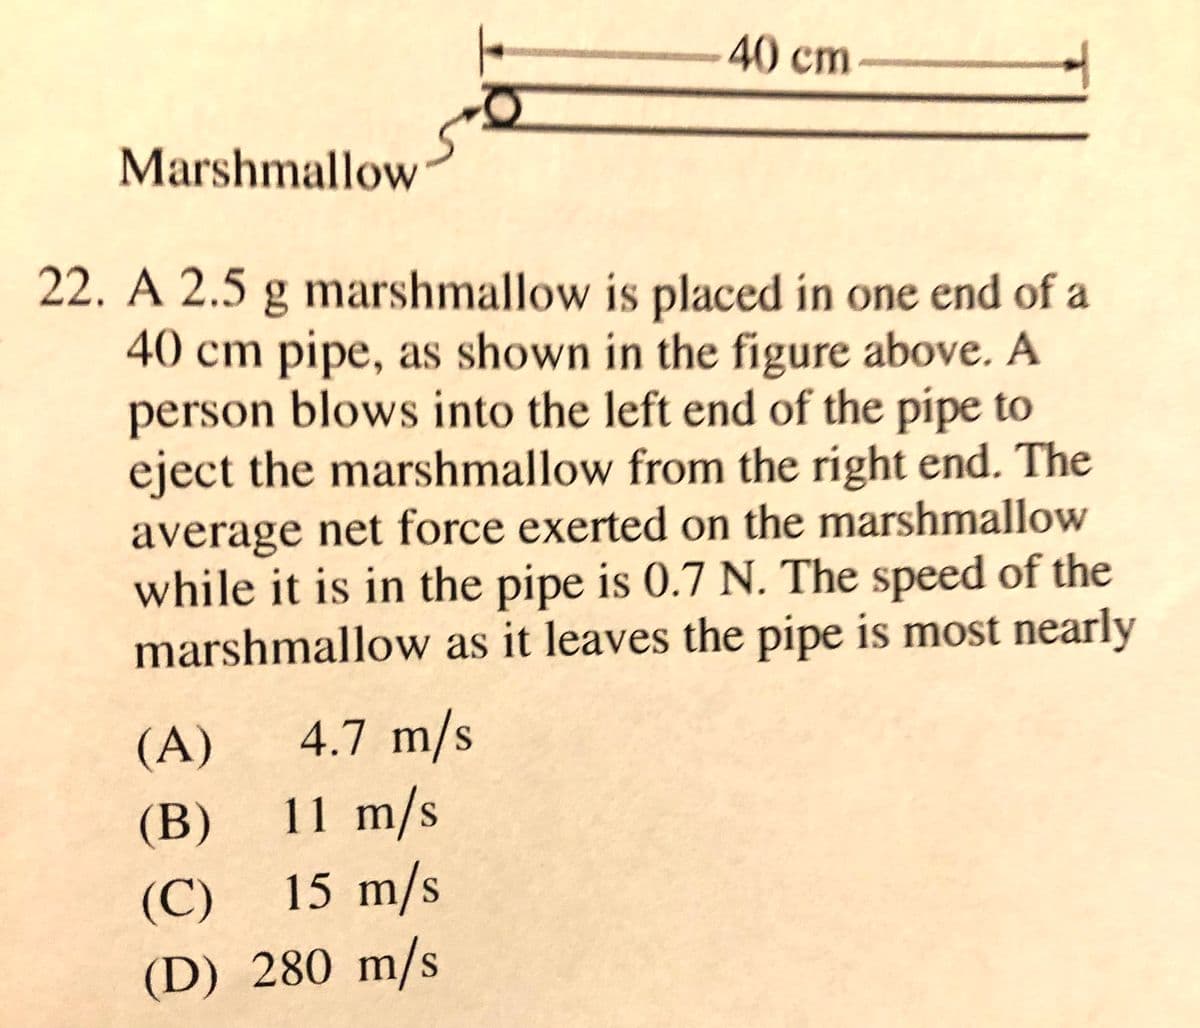 40cm
Marshmallow
22. A 2.5 g marshmallow is placed in one end of a
40 cm pipe, as shown in the figure above. A
person blows into the left end of the pipe to
eject the marshmallow from the right end. The
average net force exerted on the marshmallow
while it is in the pipe is 0.7 N. The speed of the
marshmallow as it leaves the pipe is most nearly
(A)
4.7 m/s
(B) 11 m/s
15 m/s
(C)
(D) 280 m/s
